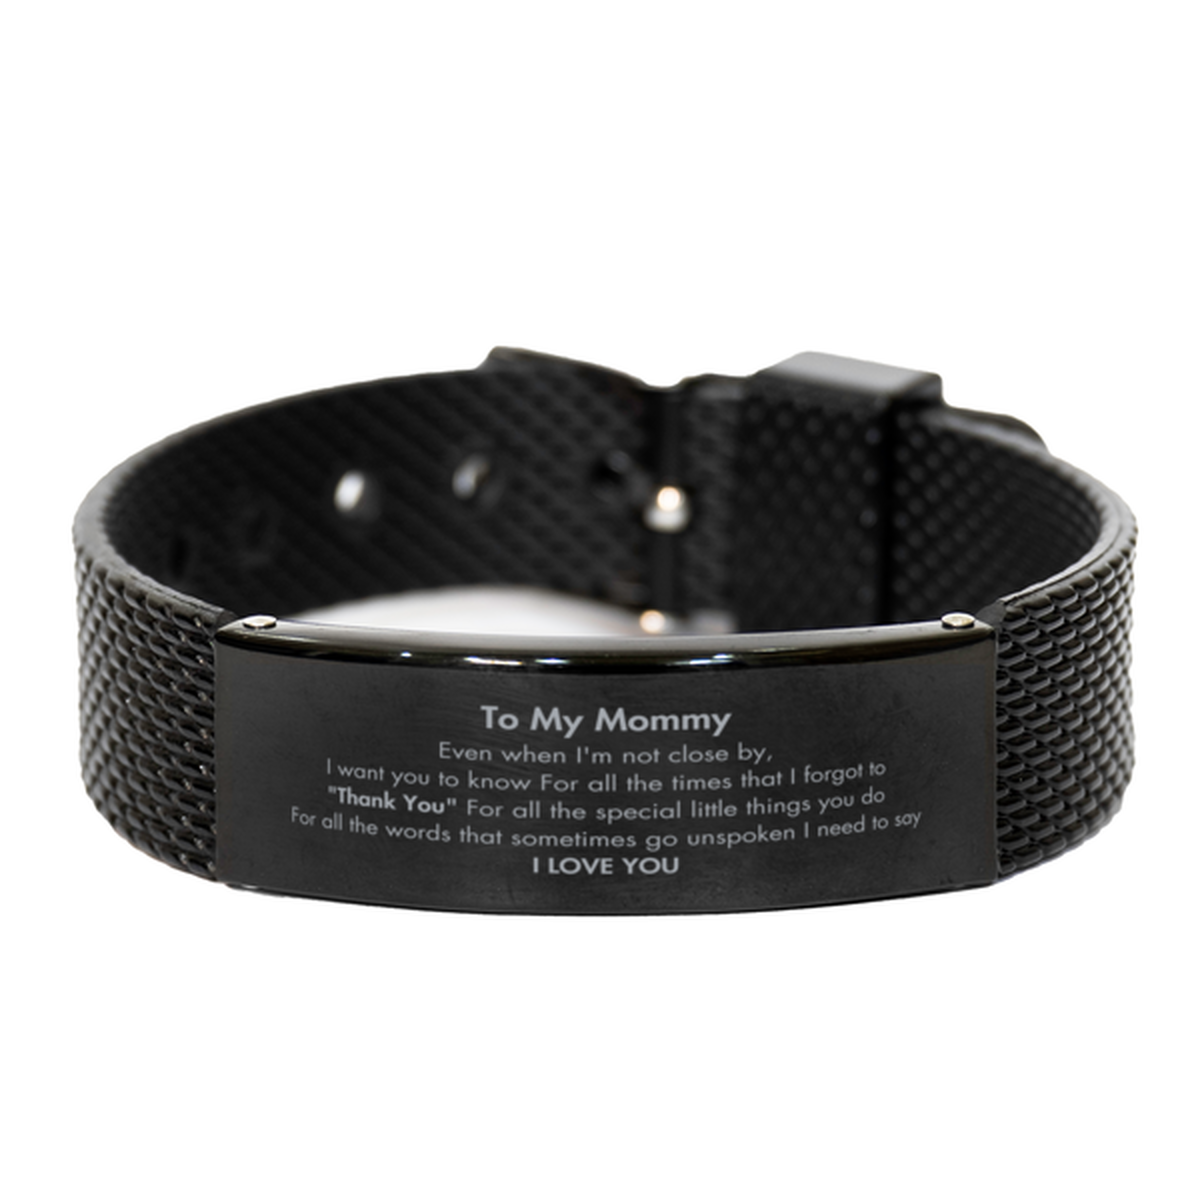 Thank You Gifts for Mommy, Keepsake Black Shark Mesh Bracelet Gifts for Mommy Birthday Mother's day Father's Day Mommy For all the words That sometimes go unspoken I need to say I LOVE YOU